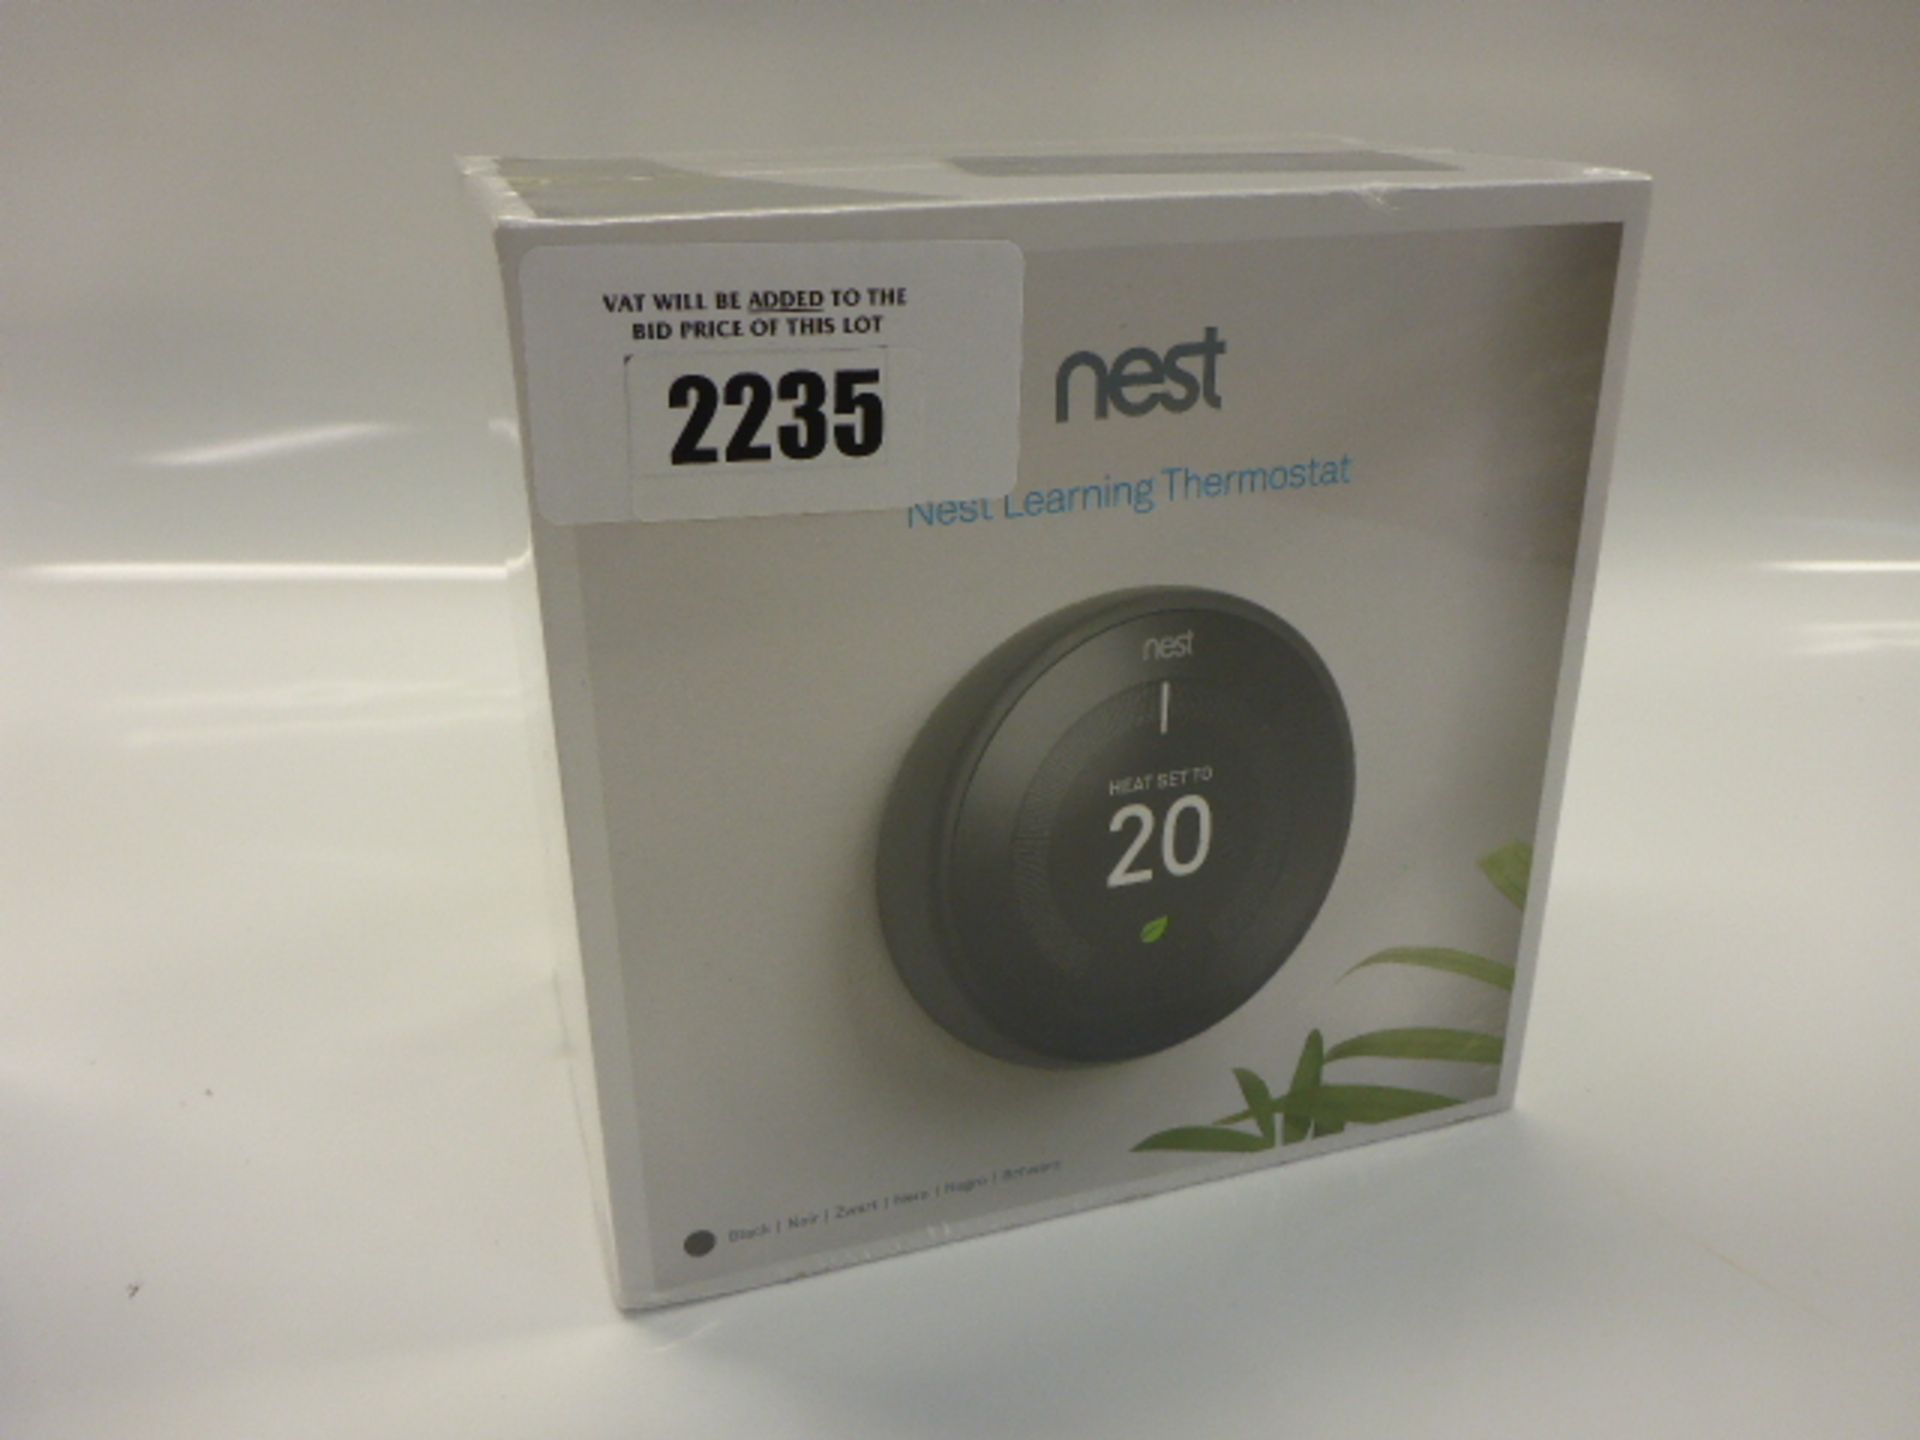 Nest learning thermostat in sealed box.